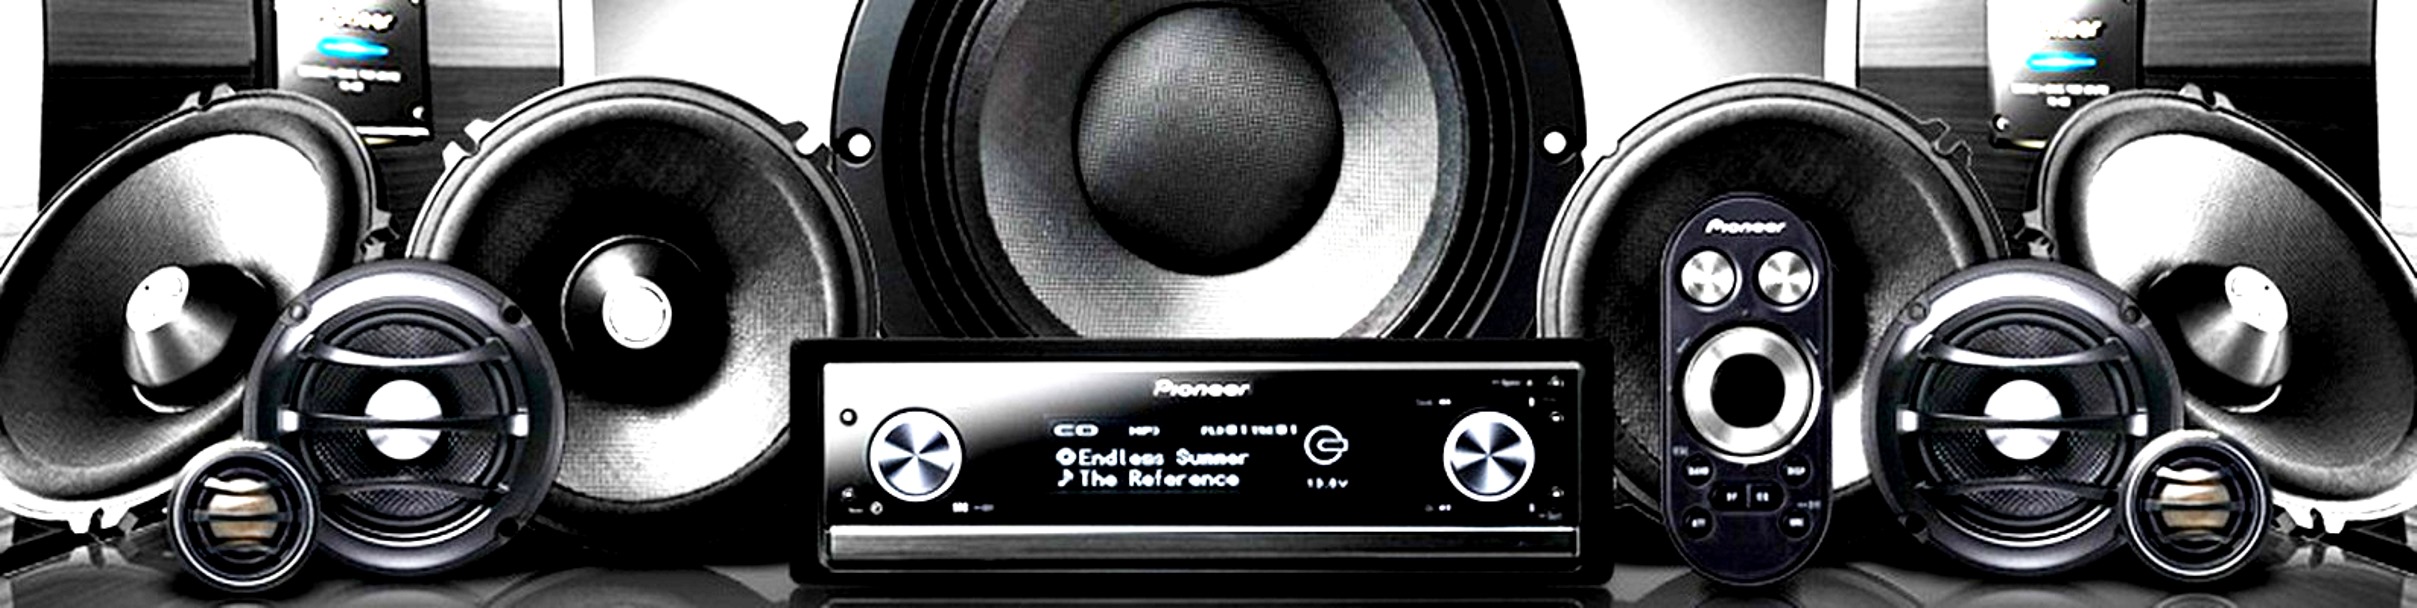 Rating of the best 20 cm speakers for cars for 2020